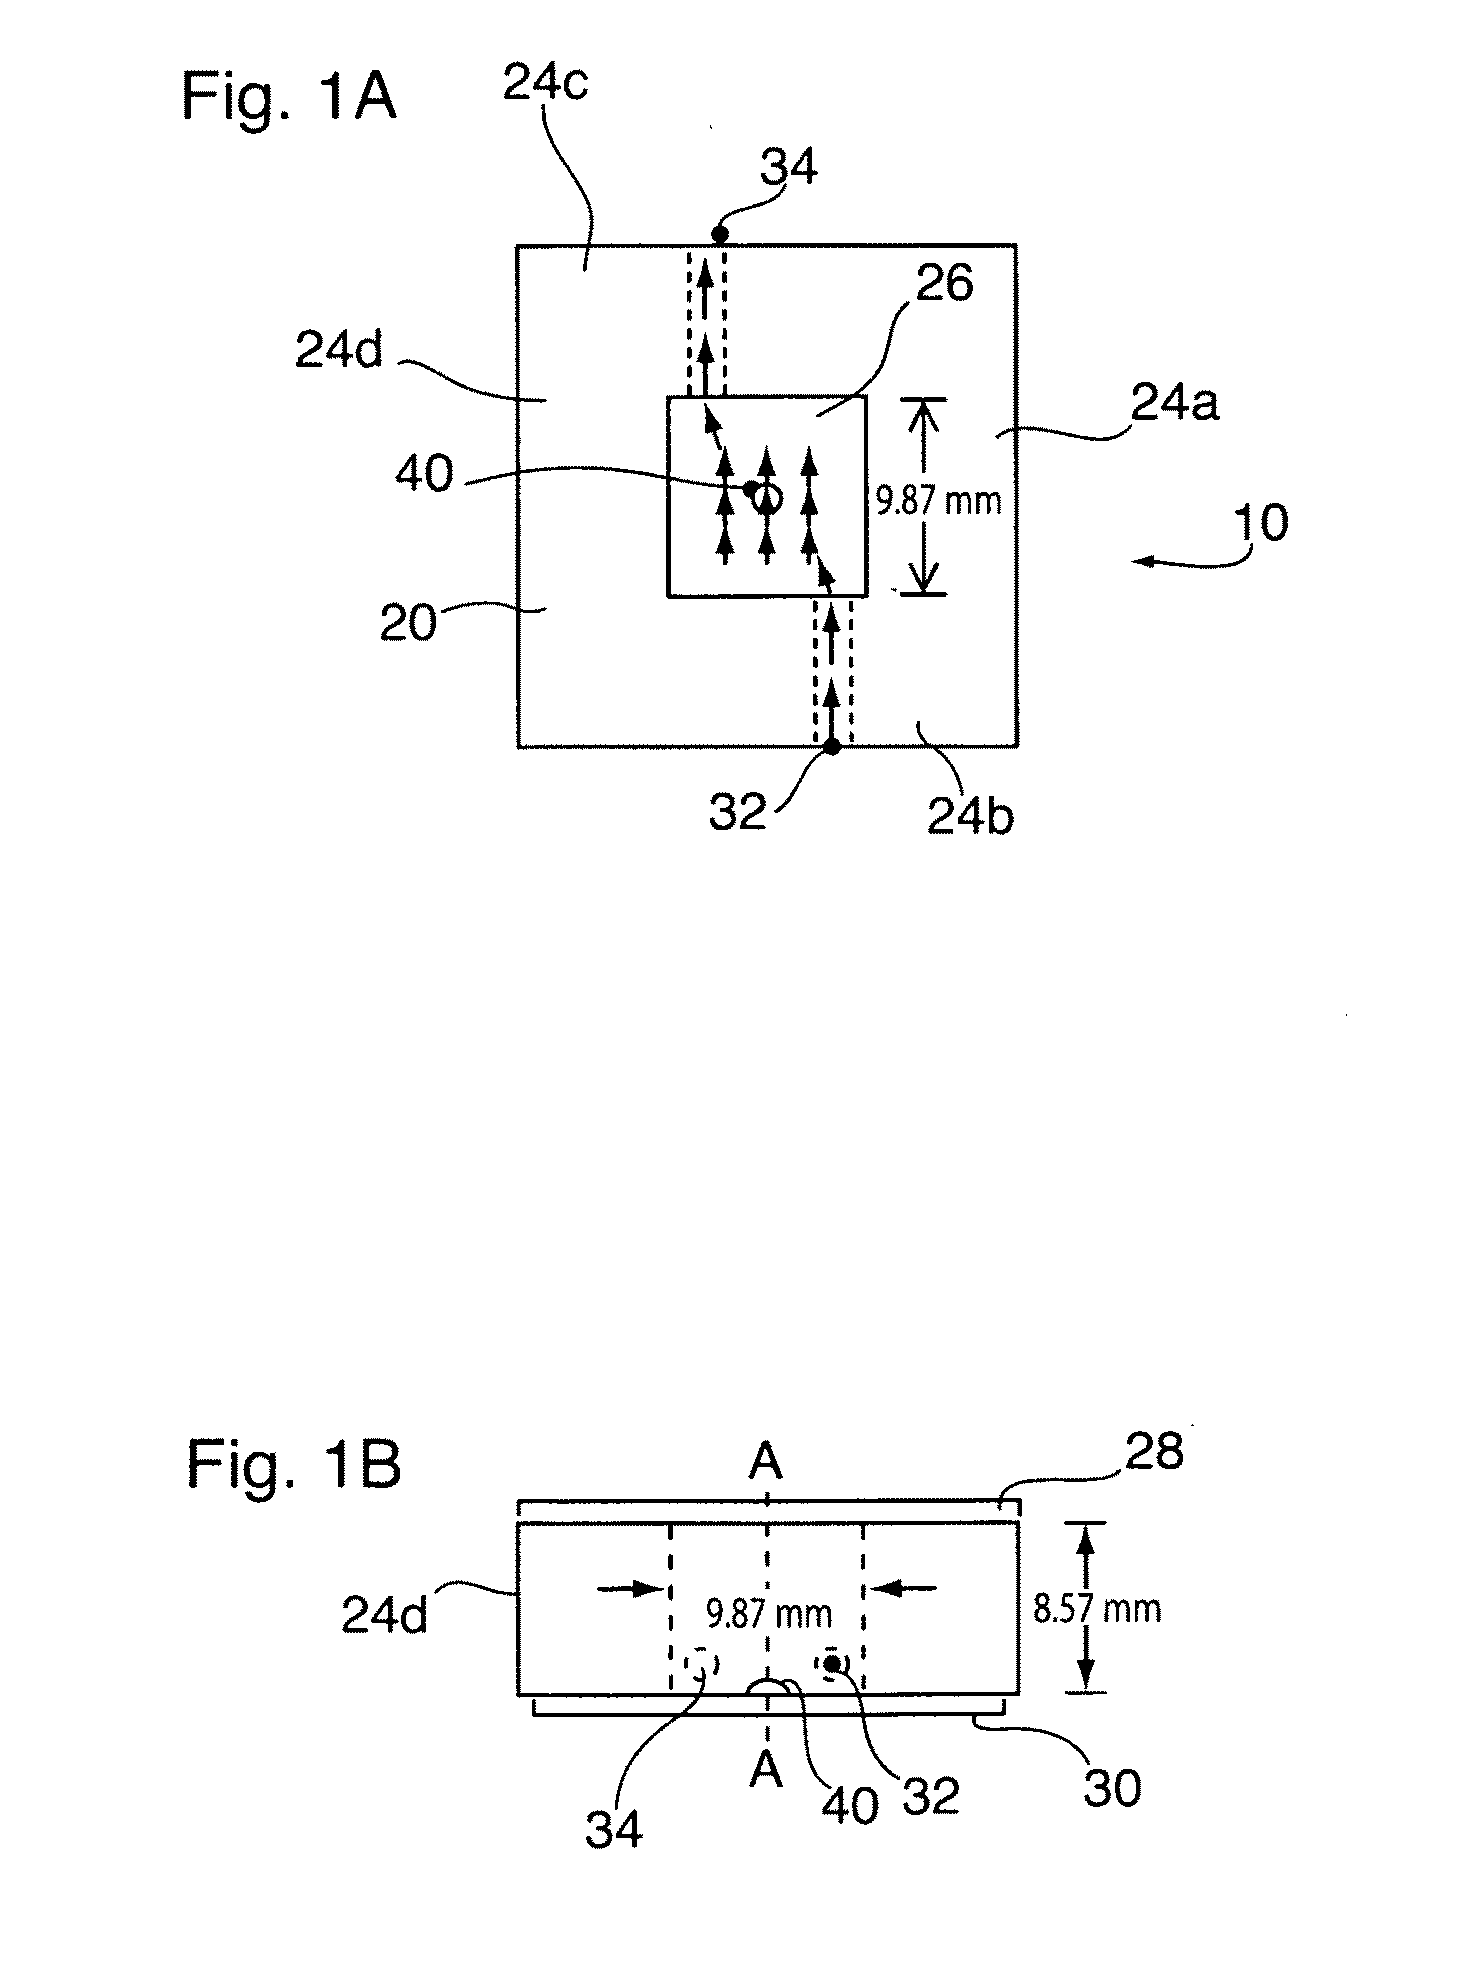 Method and apparatus to conduct kinetic analysis of platelet function in whole blood samples